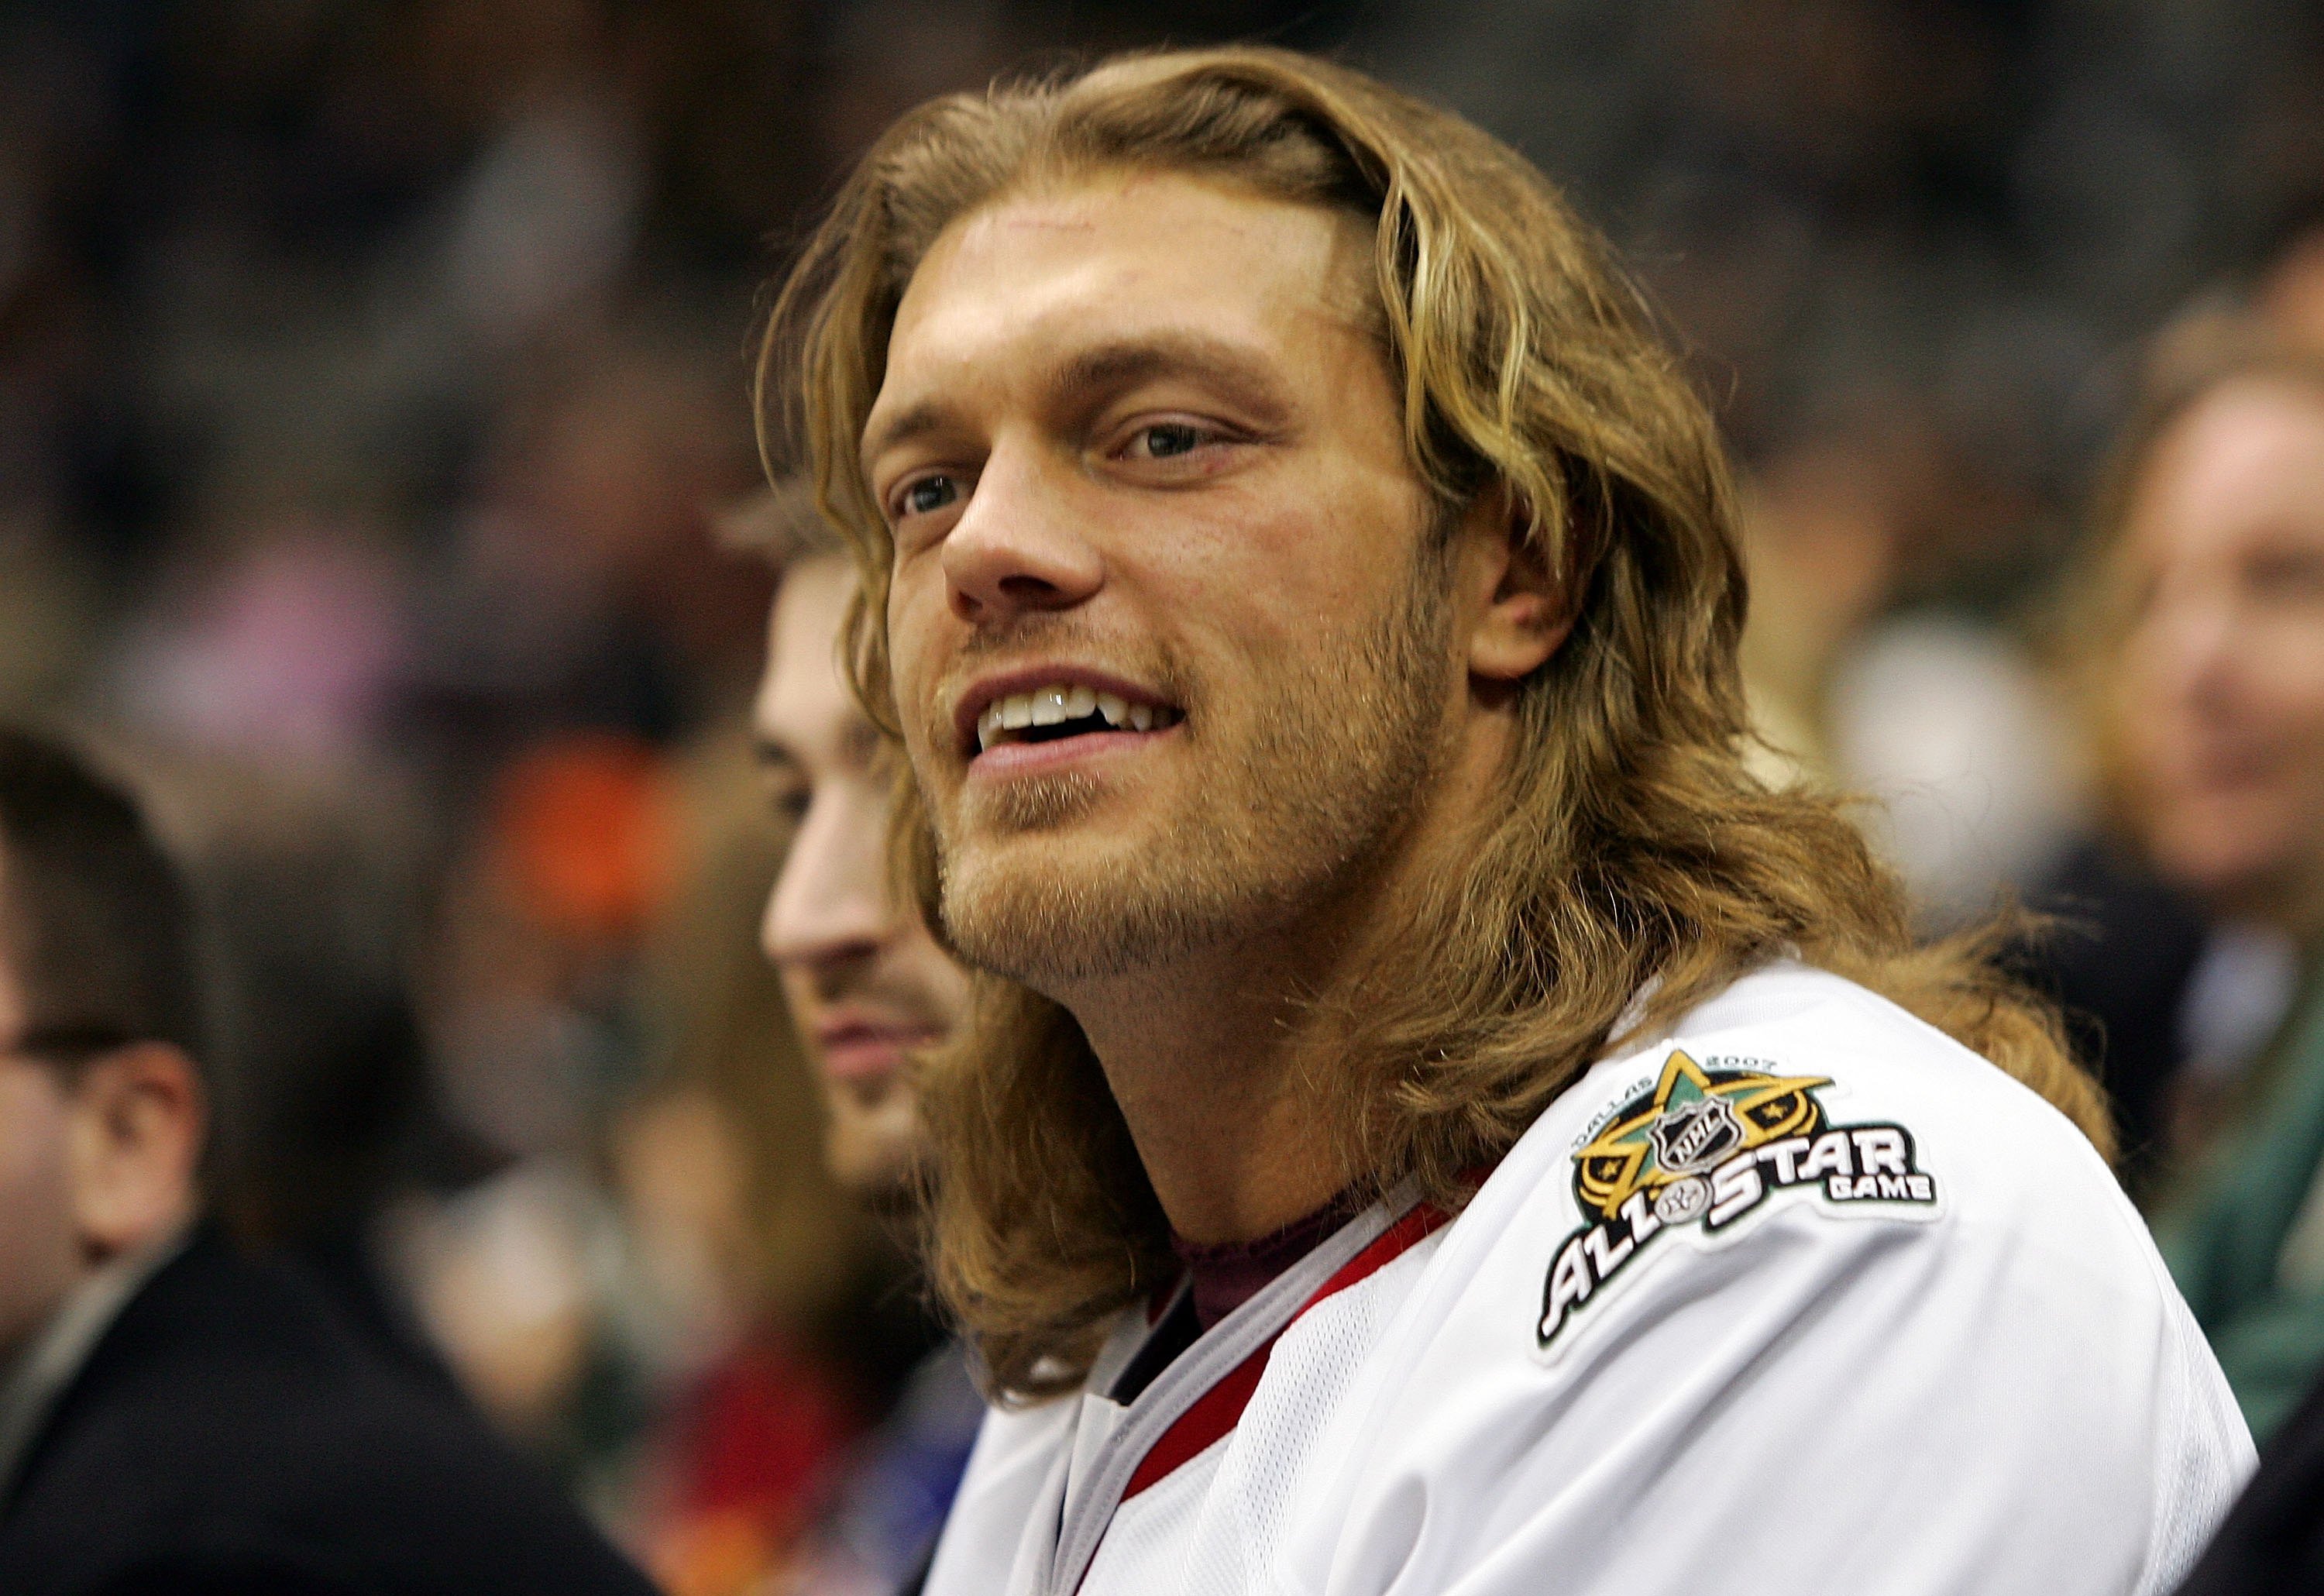 Edge at the 2007 NHL Youngstars Game on January 23, 2007, in Dallas, Texas. | Source: Getty Images